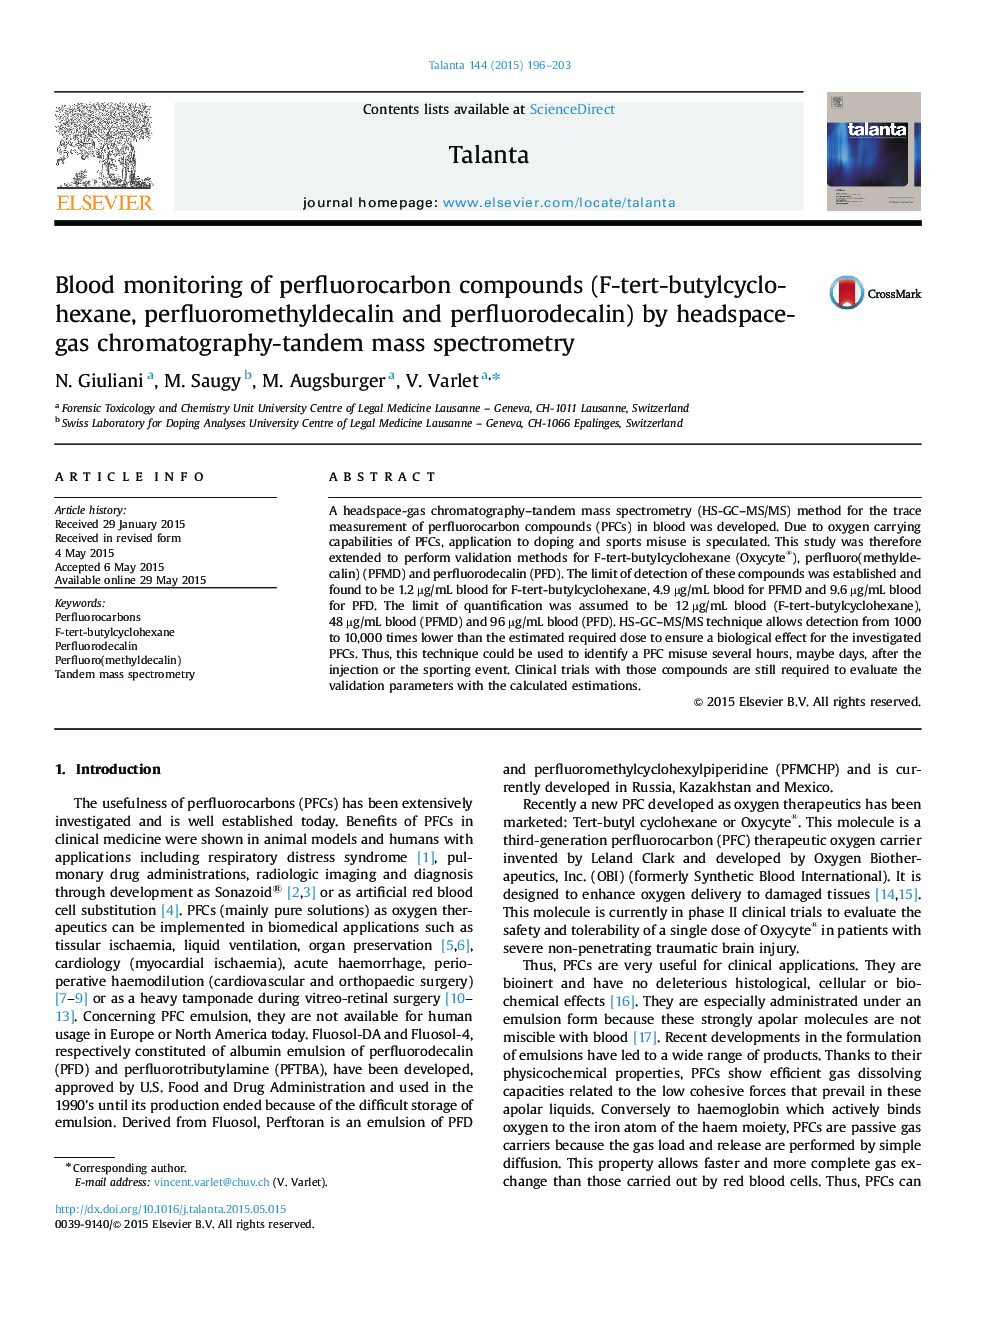 Blood monitoring of perfluorocarbon compounds (F-tert-butylcyclohexane, perfluoromethyldecalin and perfluorodecalin) by headspace-gas chromatography-tandem mass spectrometry